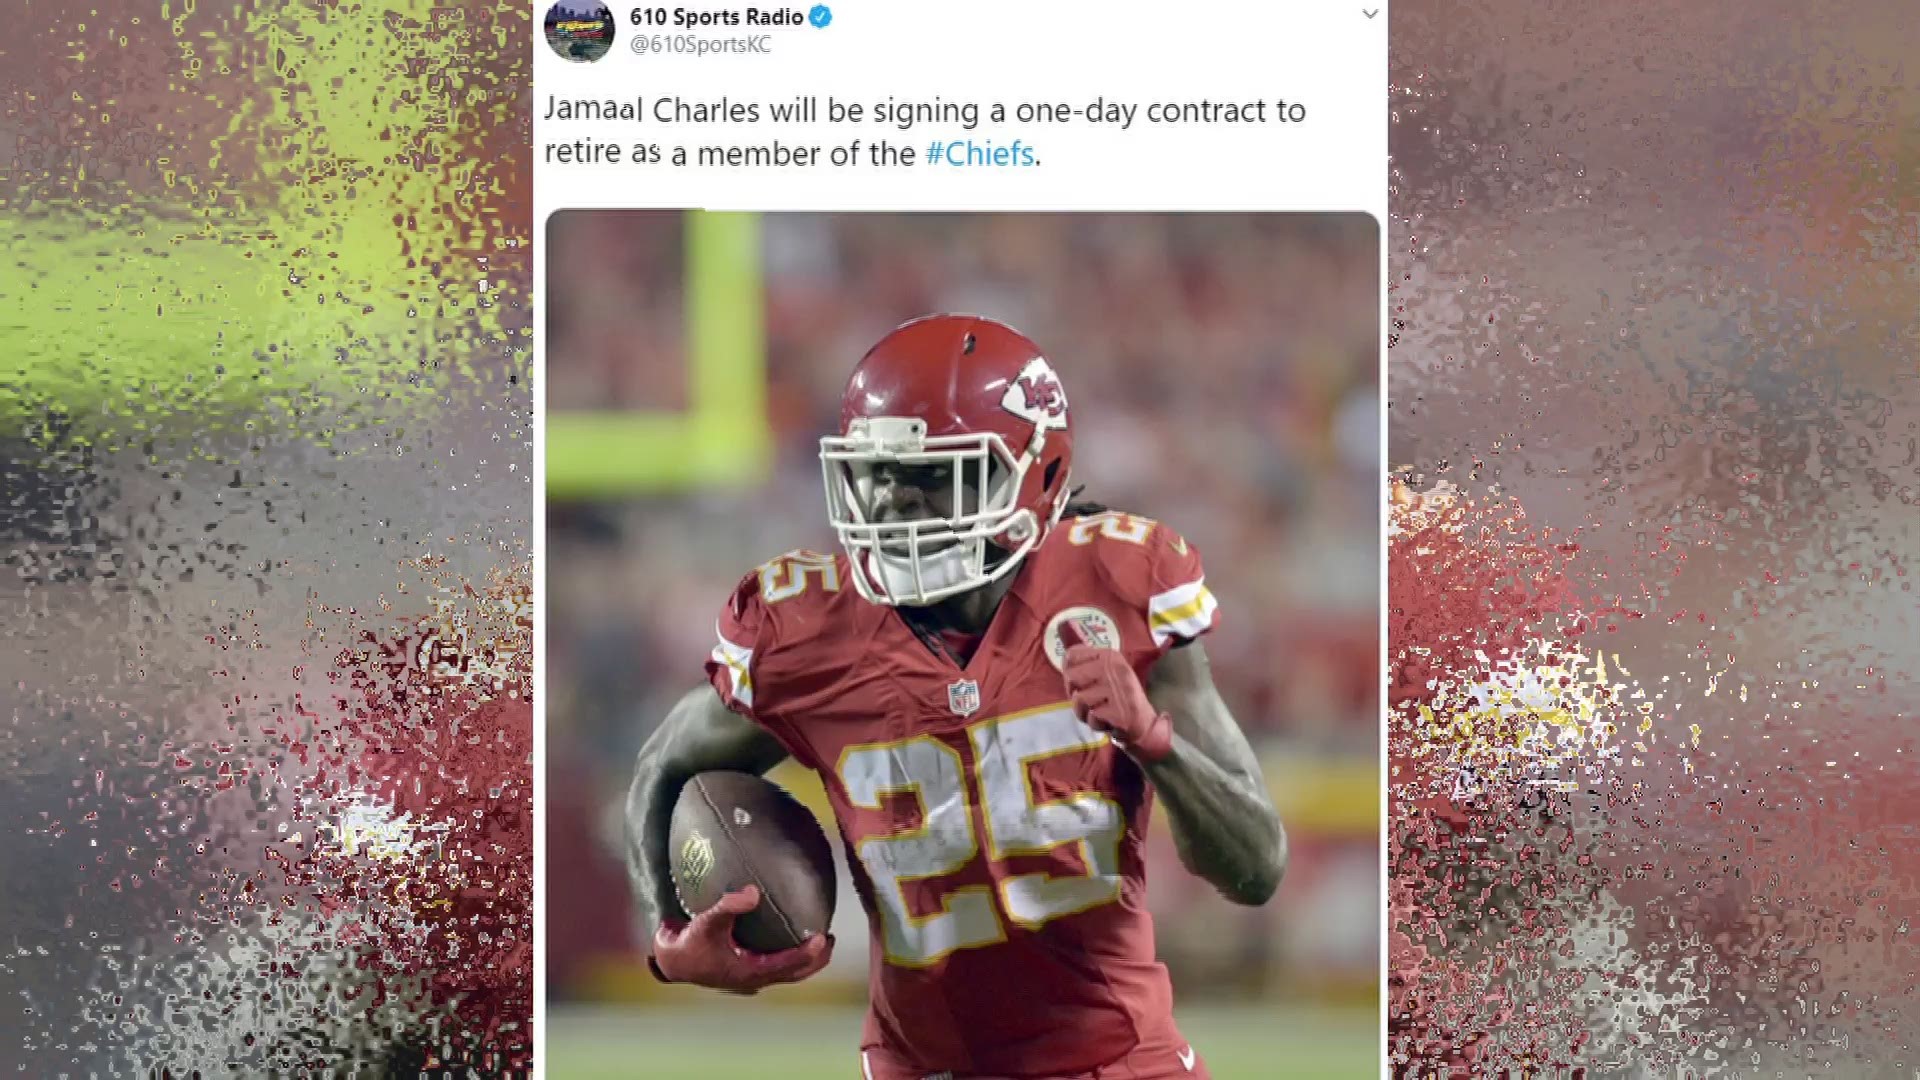 The former Longhorn running back paid tribute to his fellow Longhorn teammate who retired from the NFL.